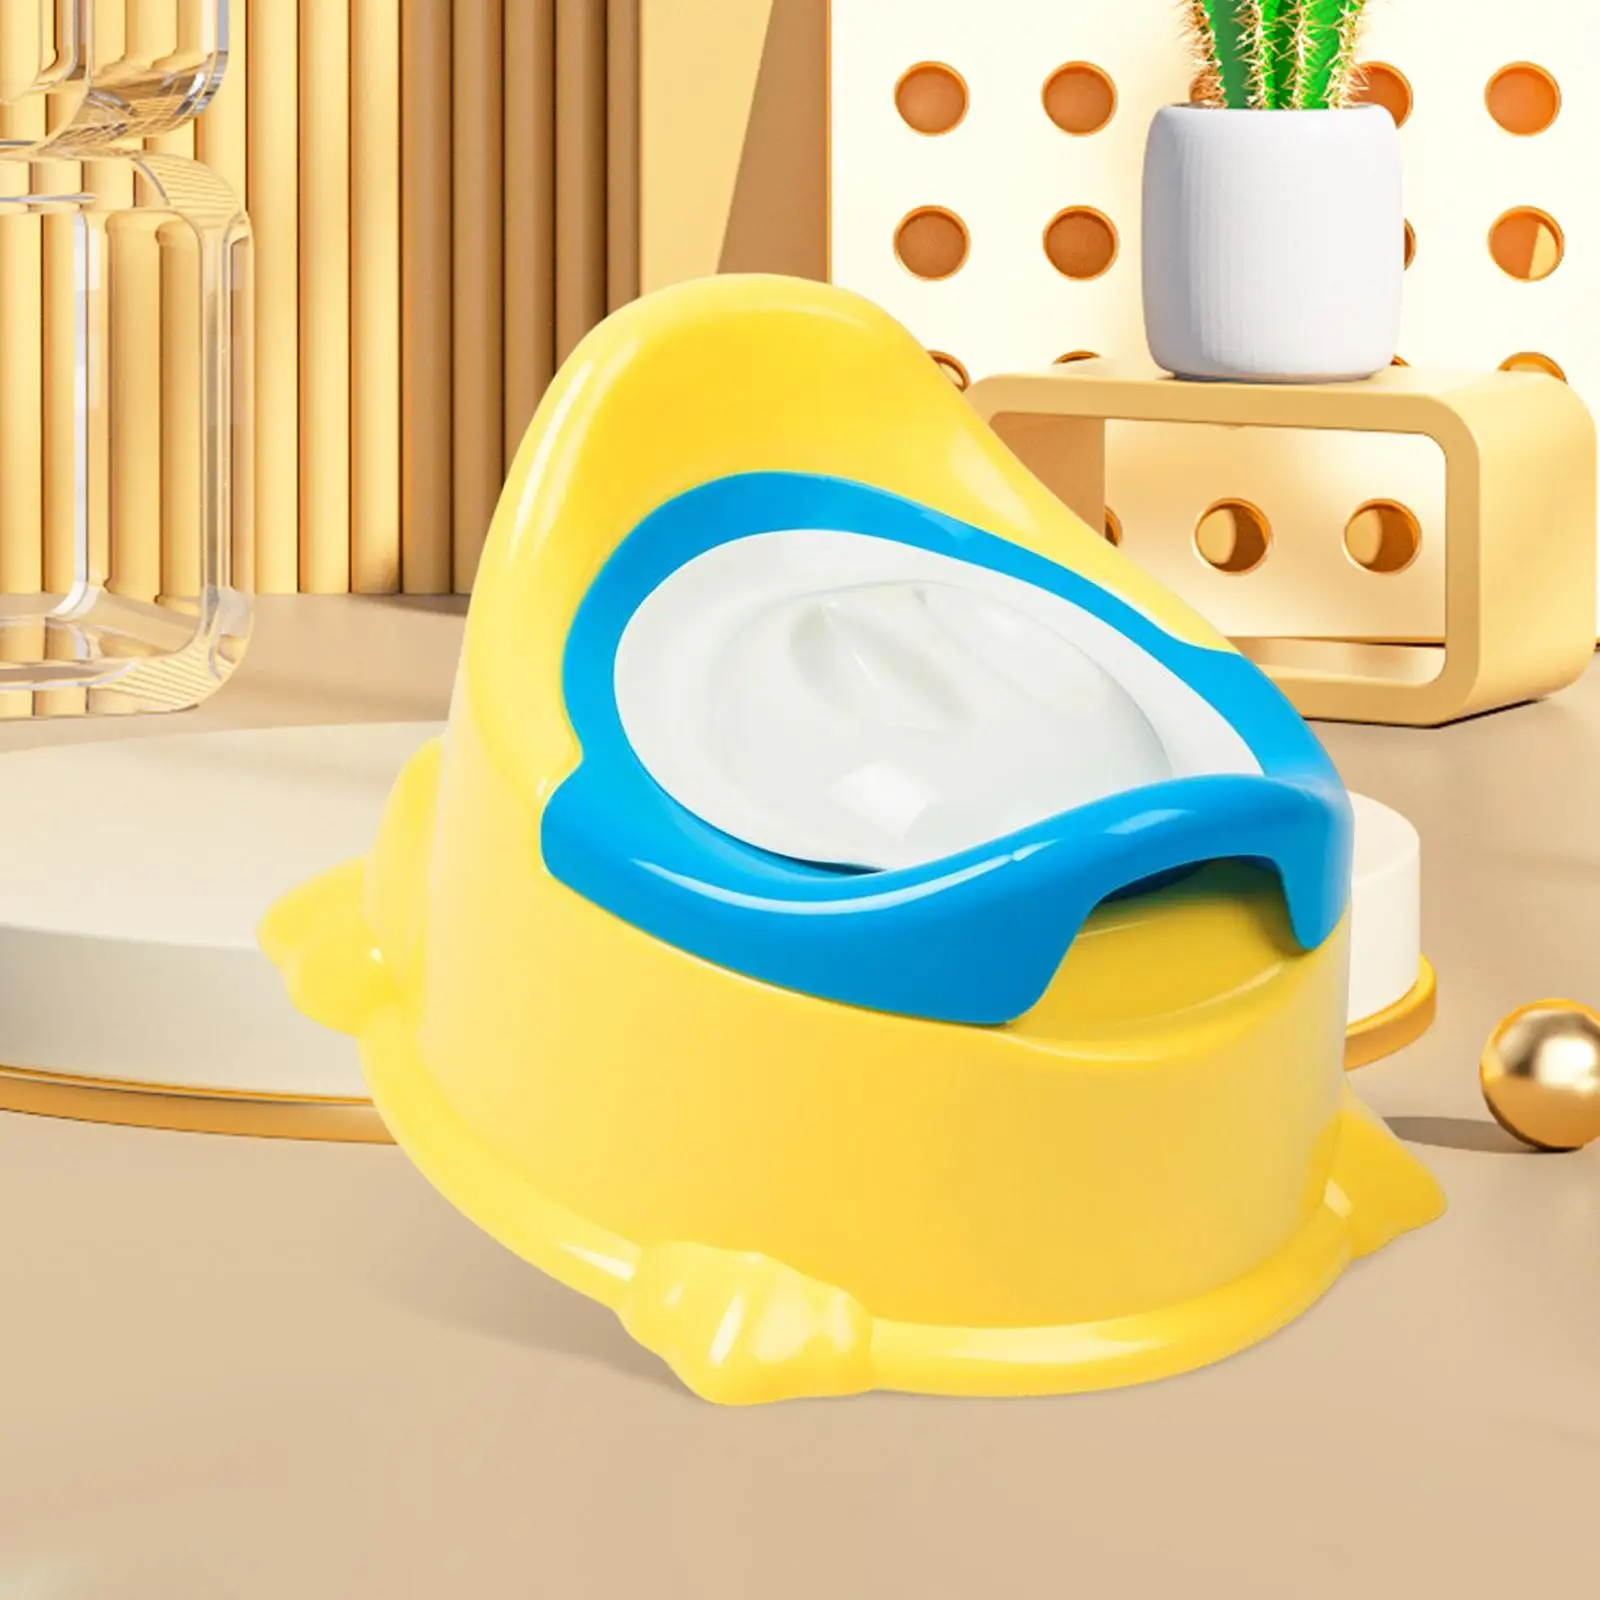 Portable Child Potty Kids Toilet Seat Comfortable for Babies 6-12 Month